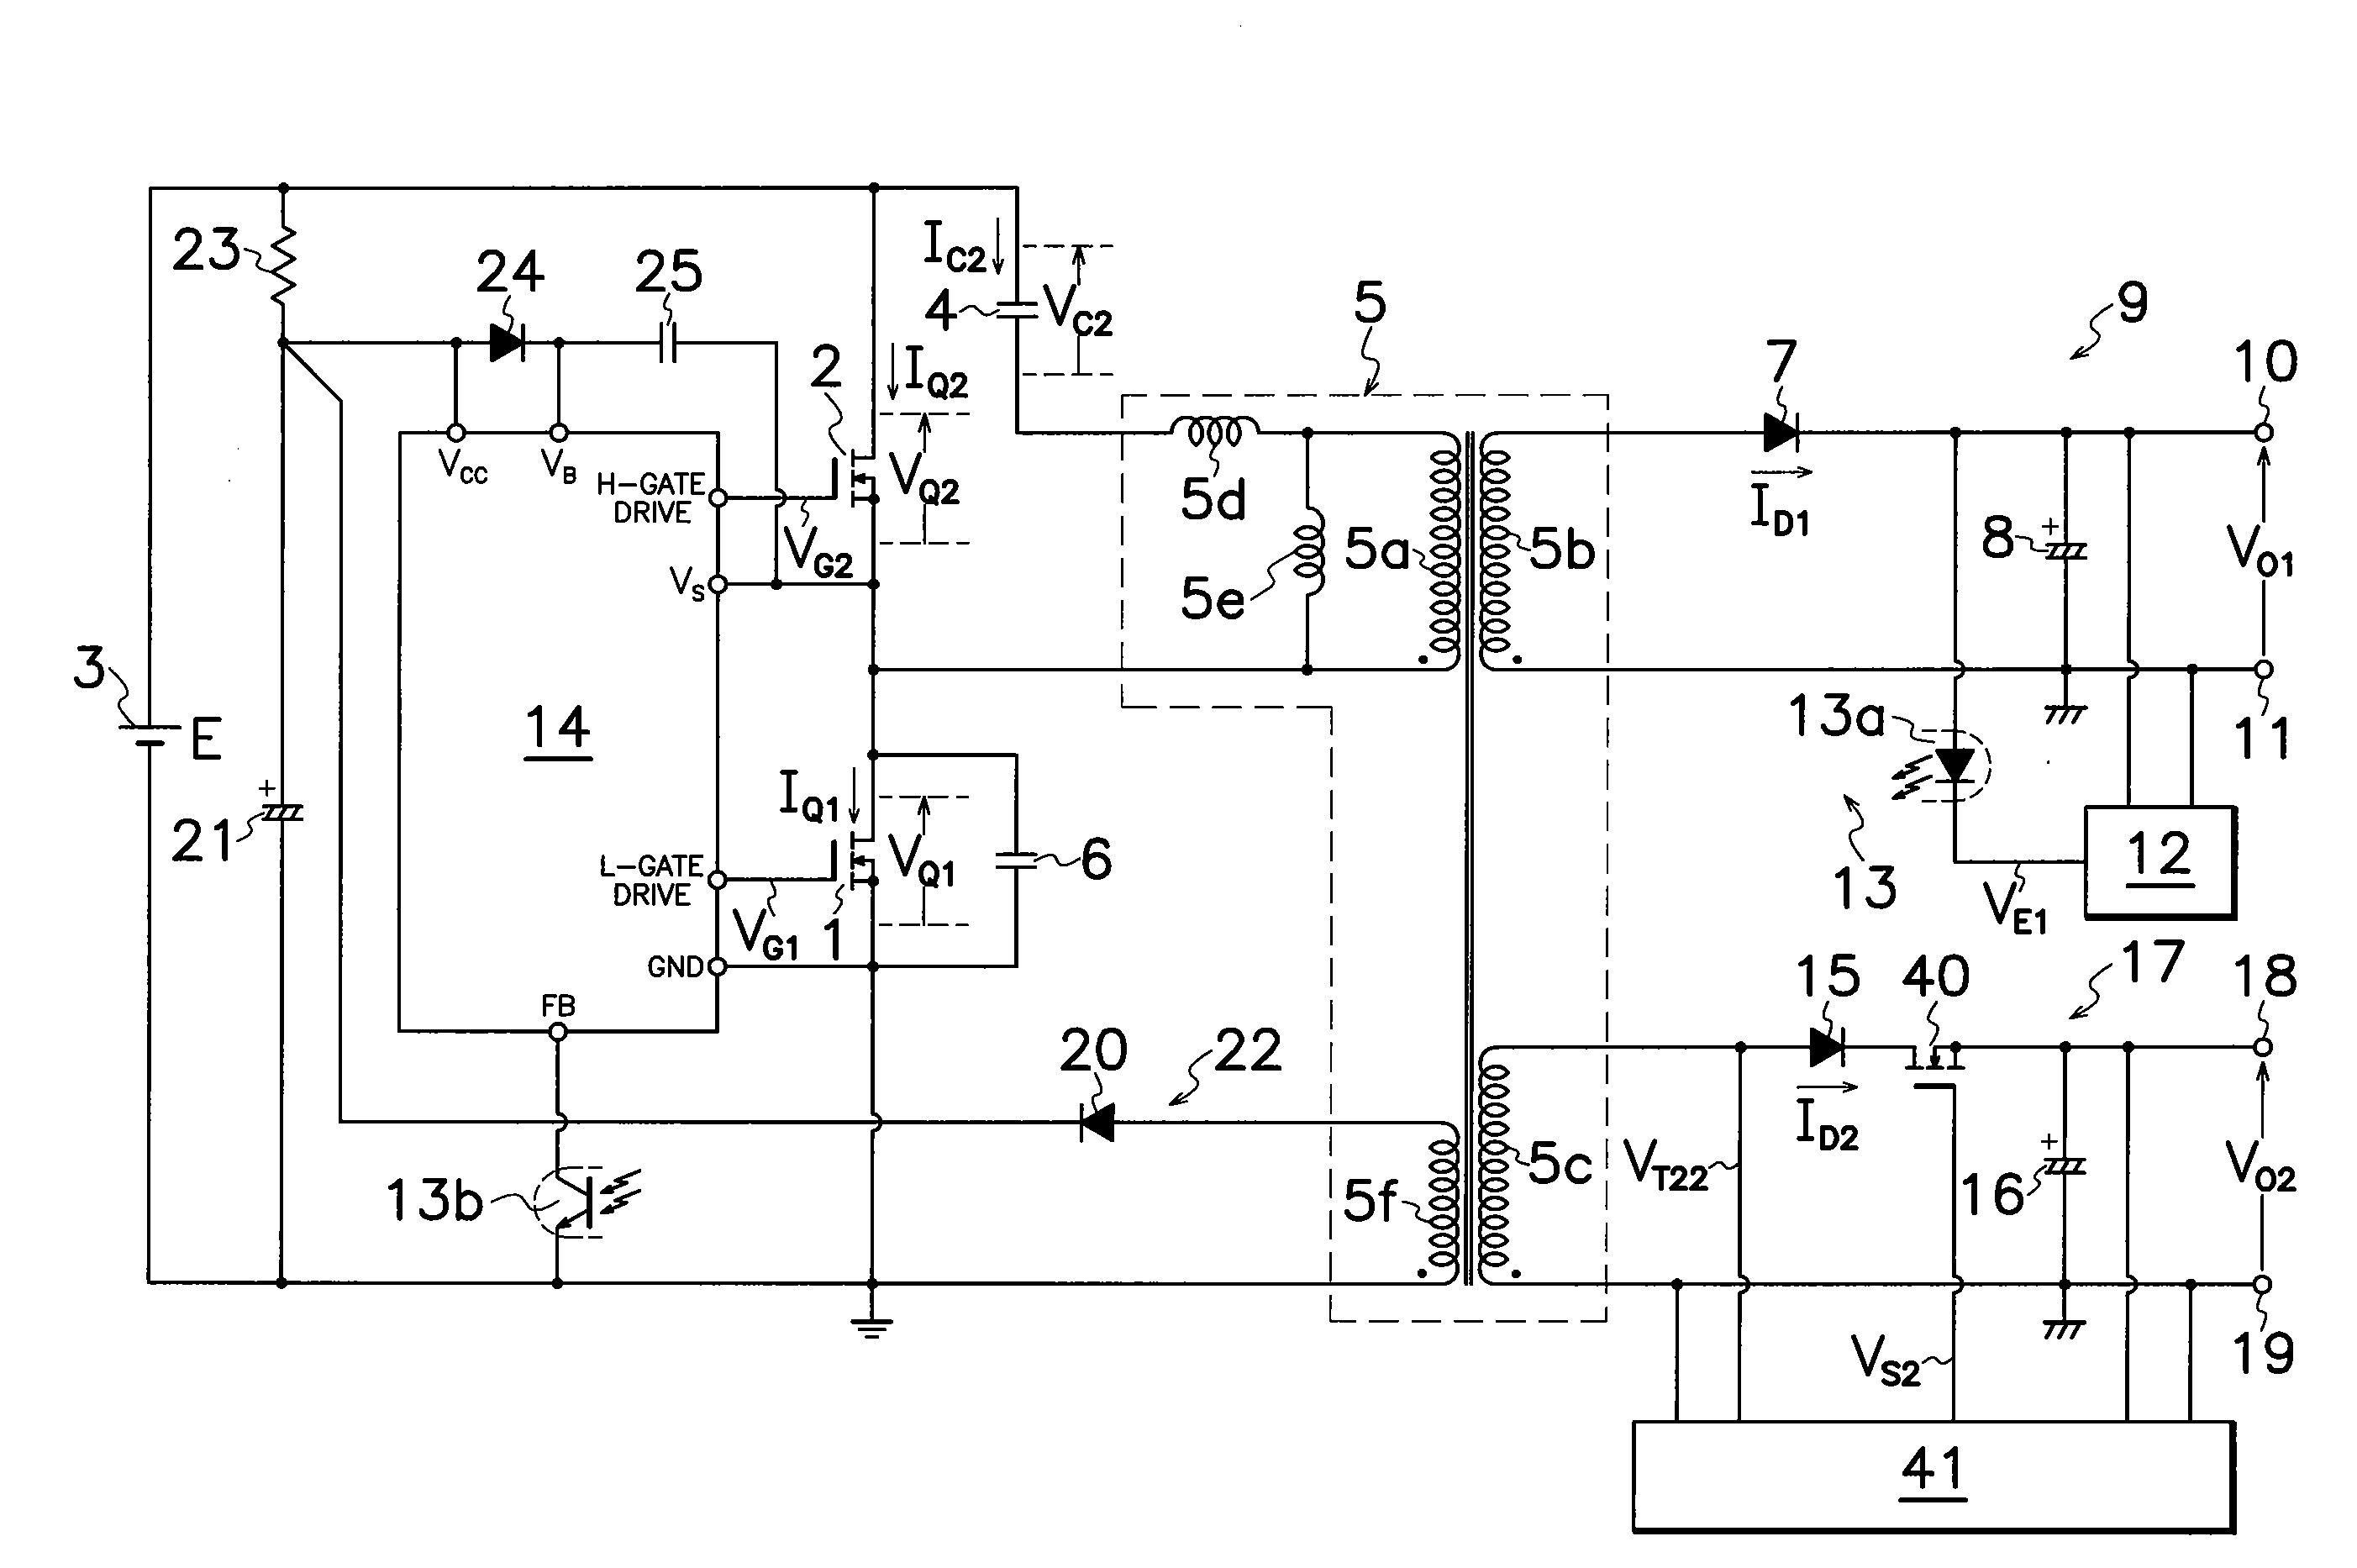 Current resonant dc-dc converter of multi-output type